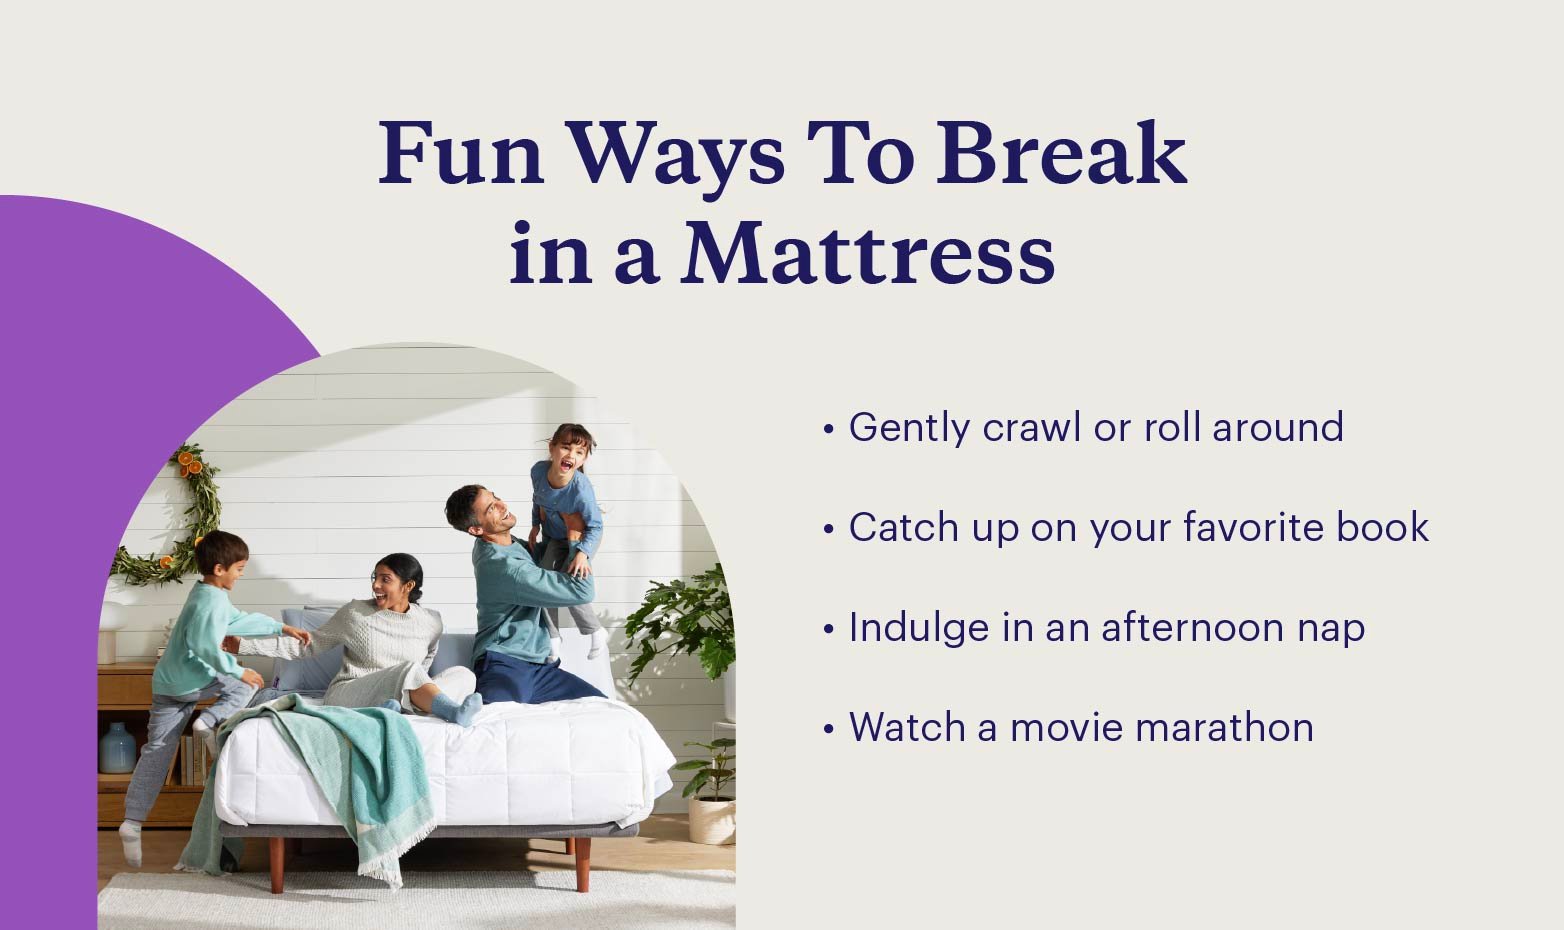 Graphic with four ways to break in a mattress with an image of a family on a bed.